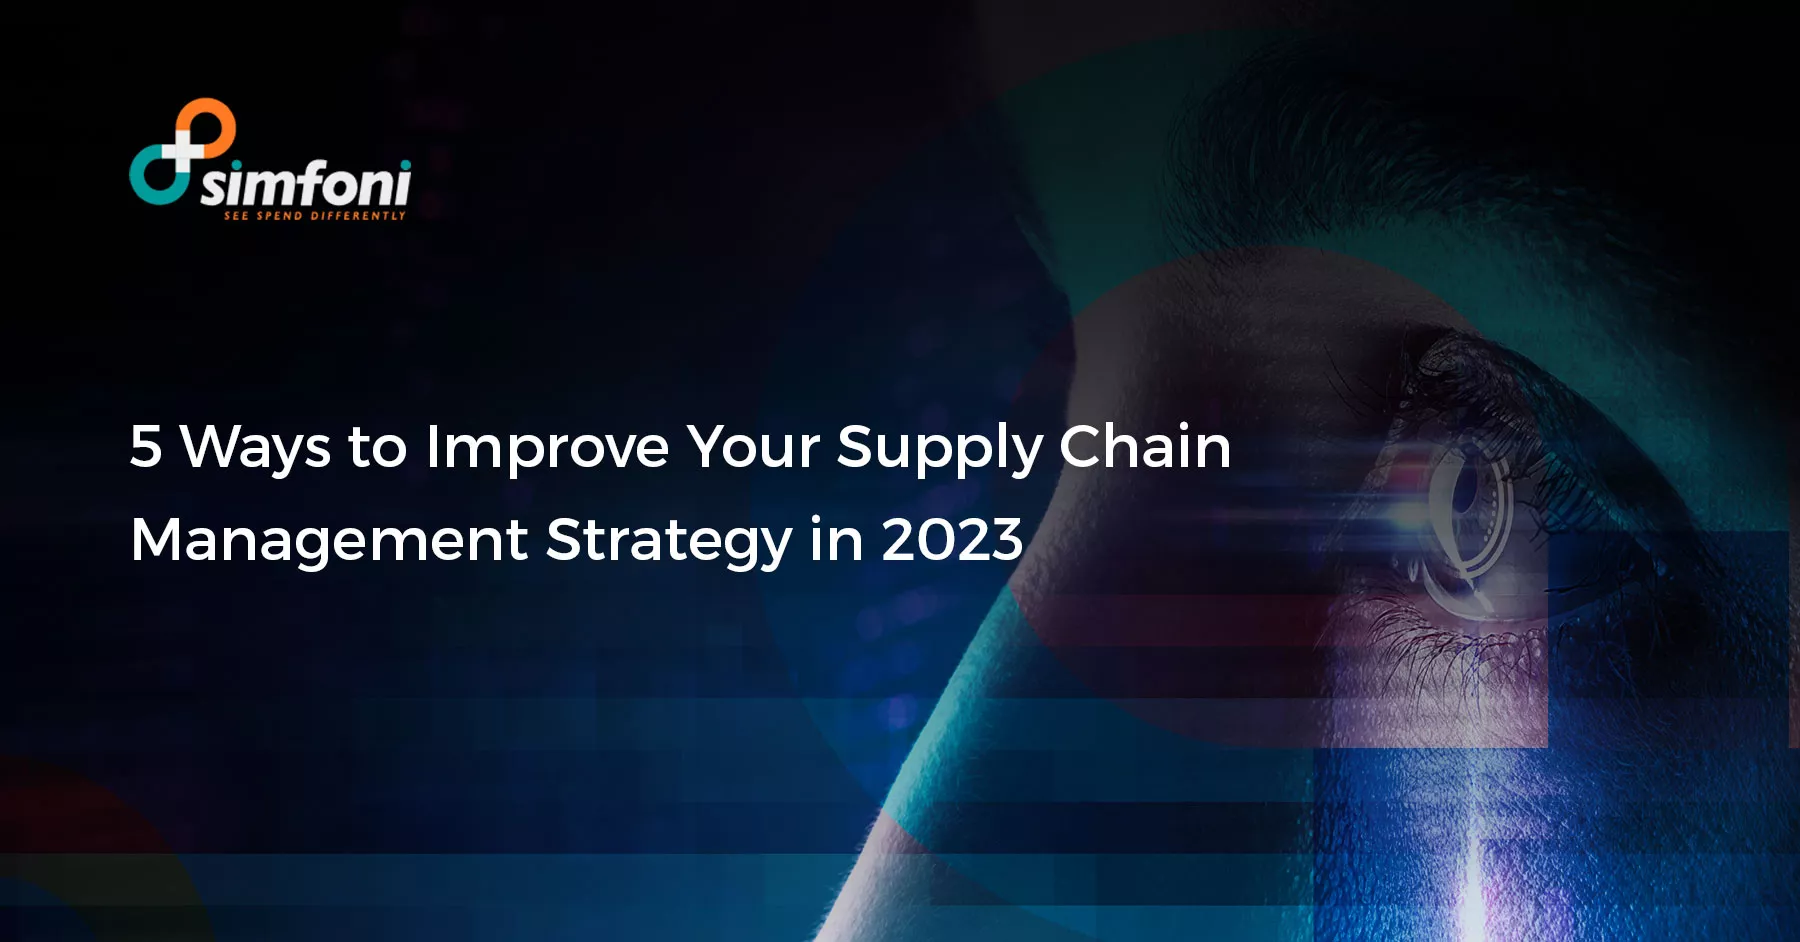 5 Ways to Improve Supply Chain Management Strategy